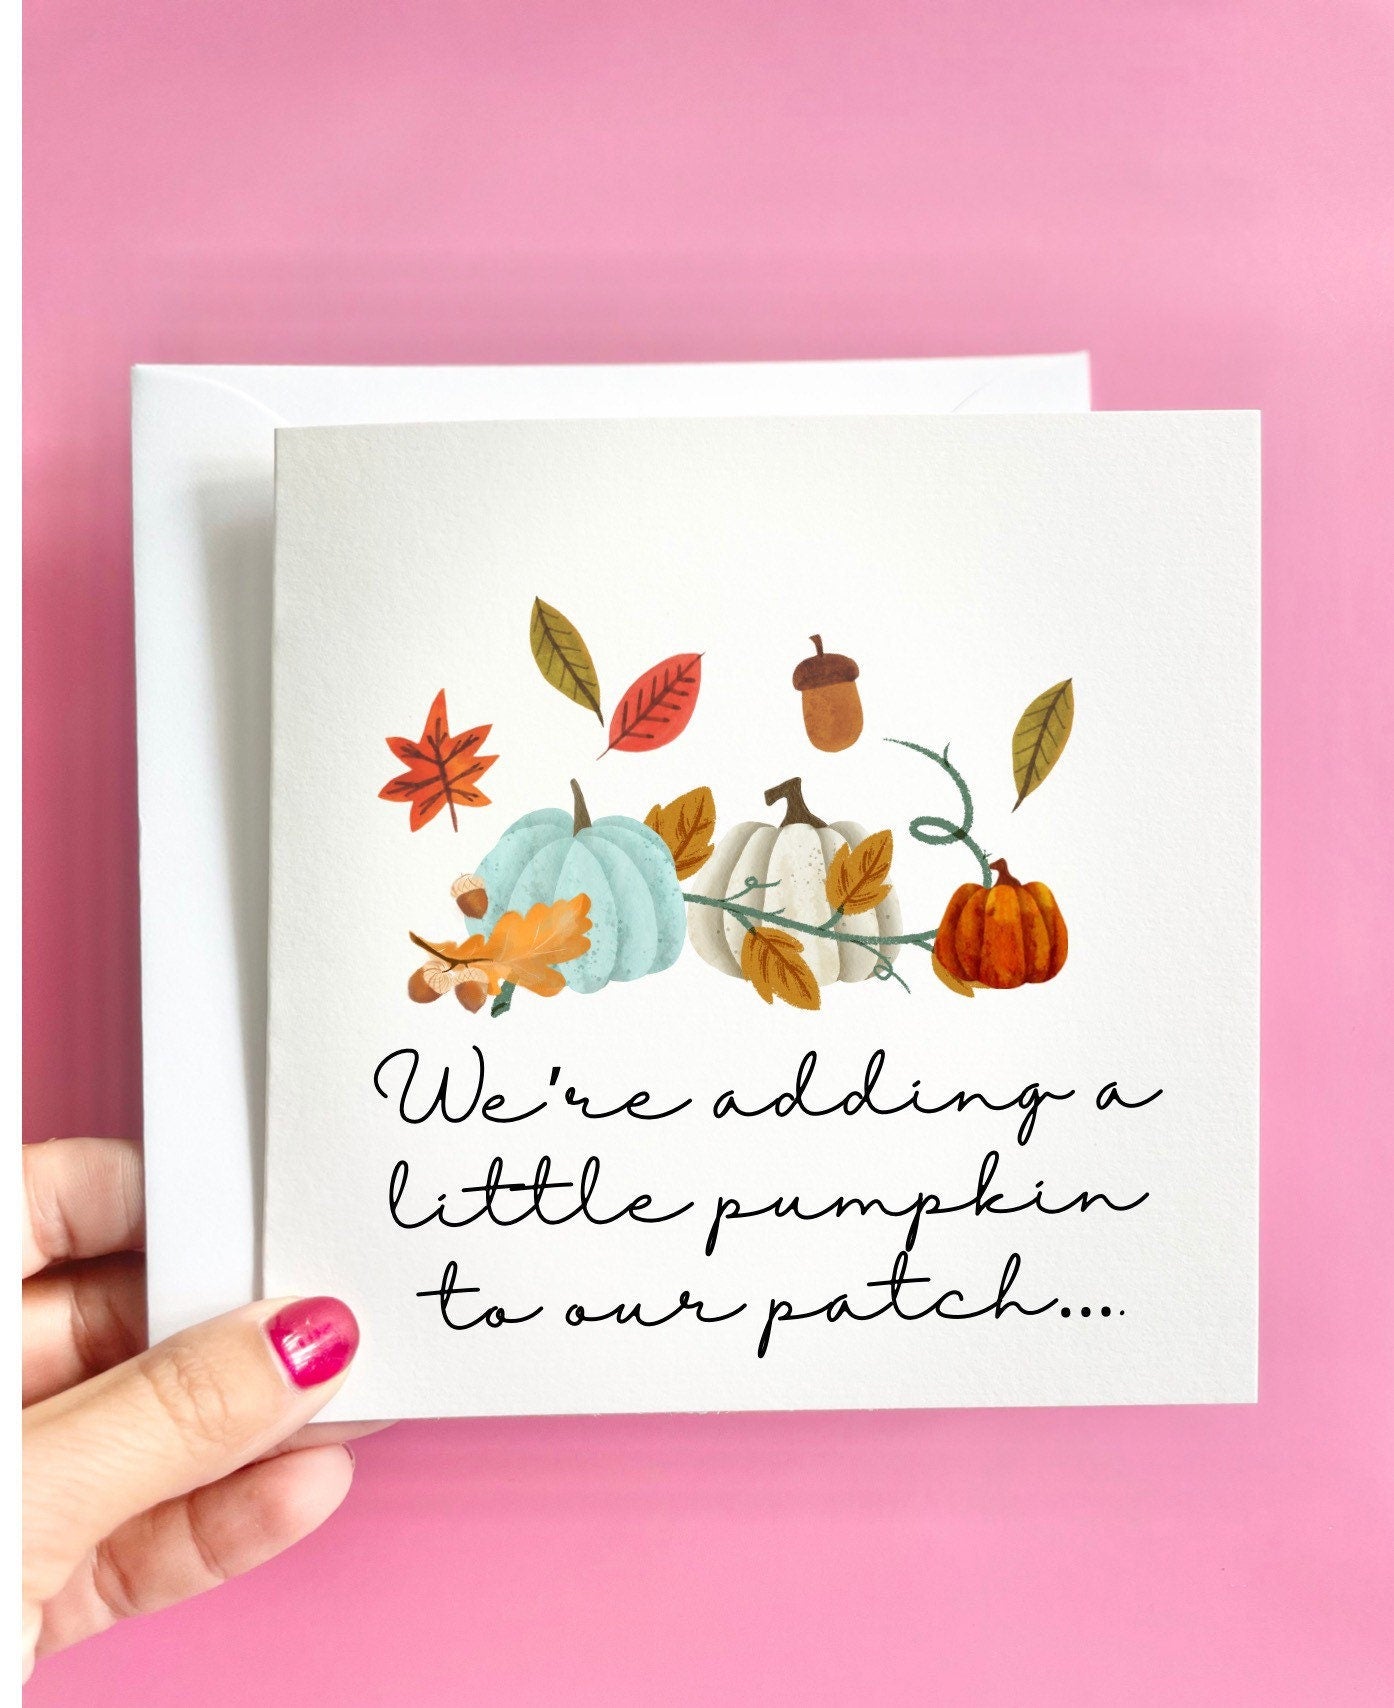 Pregnancy announcement card, baby news cards, adding a pumpkin to our patch, autumn baby reveal card, card for baby scan photo